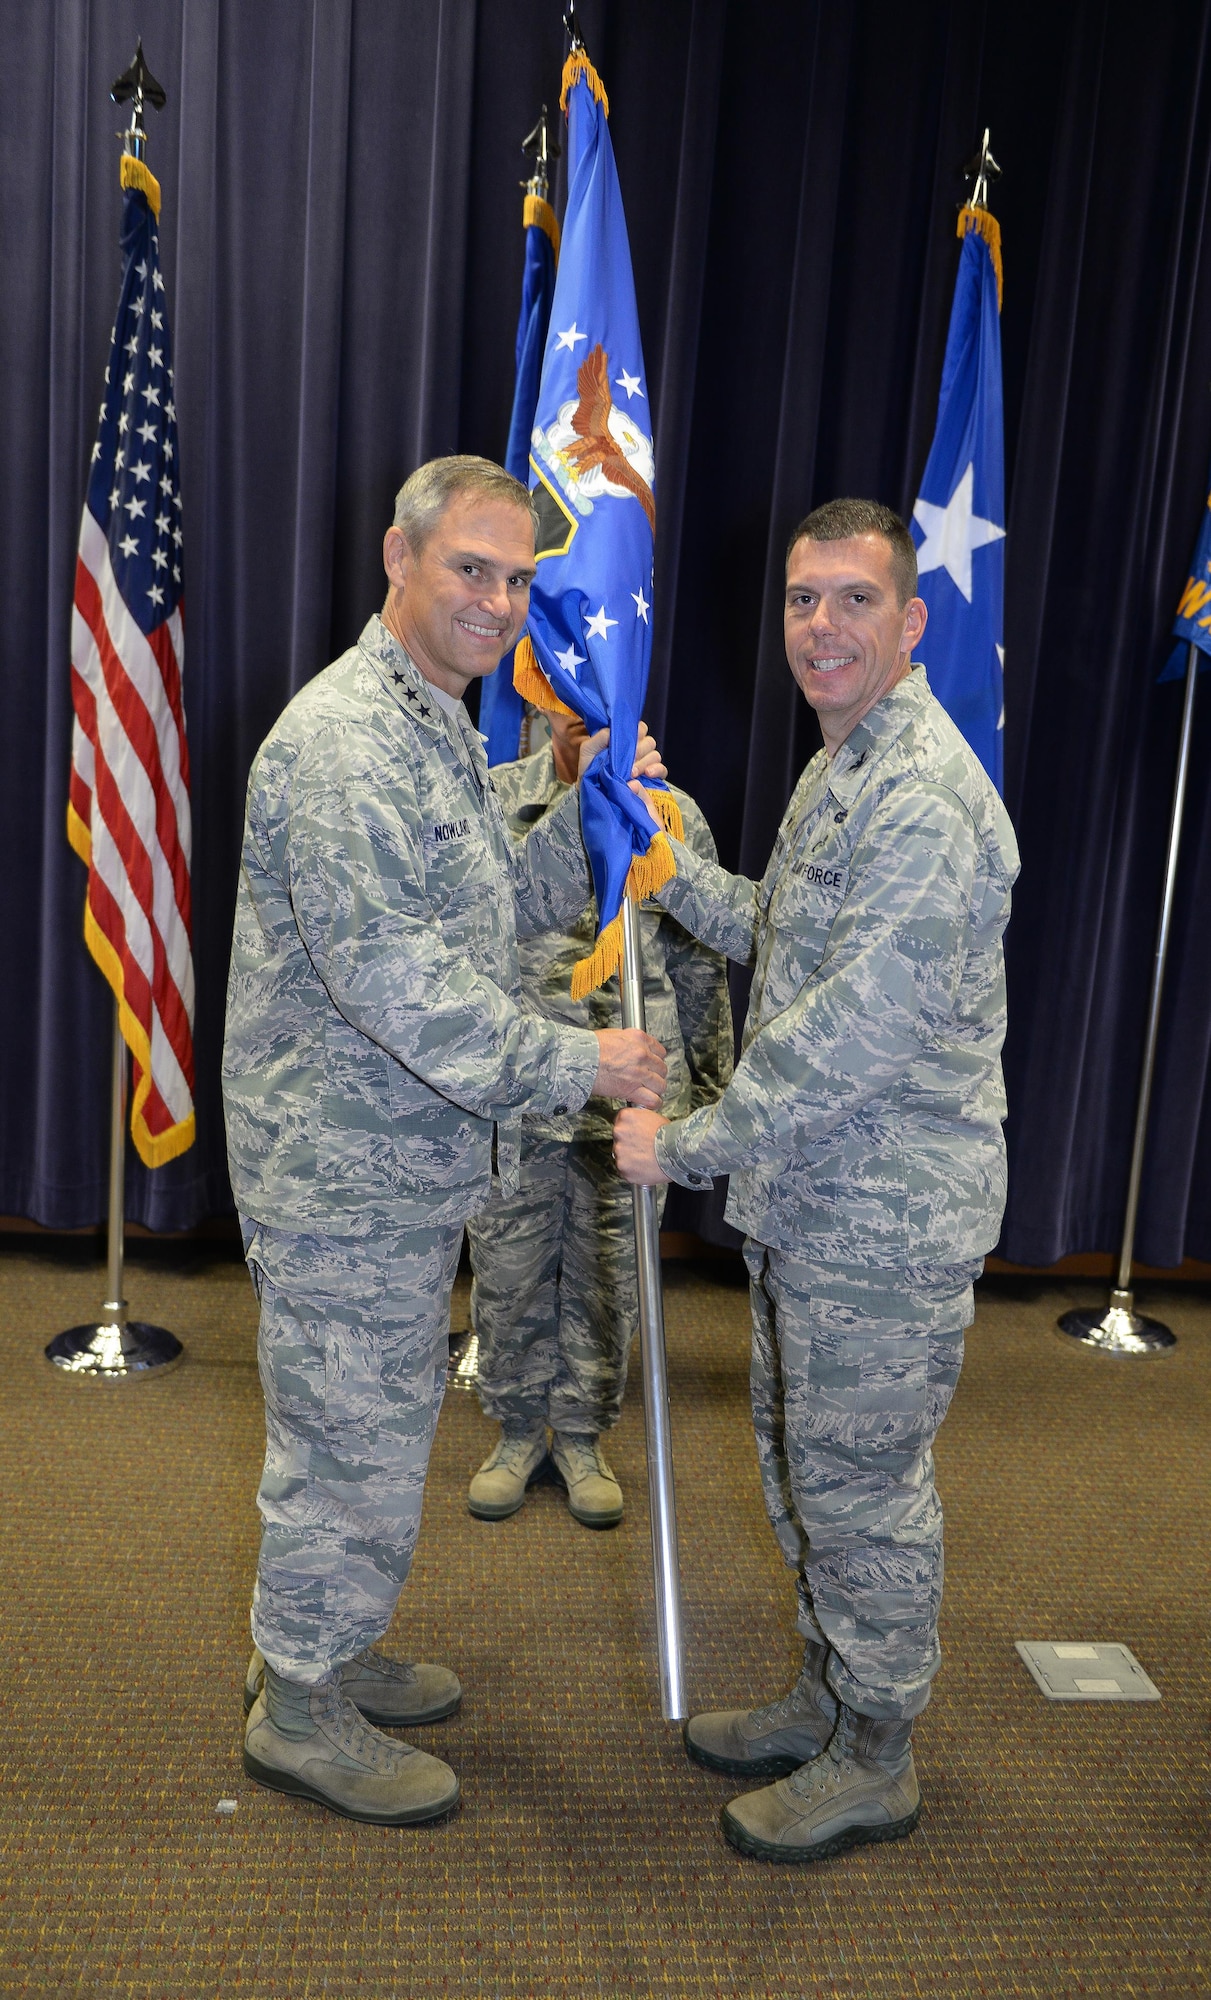 U.S. Air Force Lt. Gen. Mark C. Nowland, 12th Air Force (Air Forces Southern) commander, hands the 557th Weather Wing guidon to U.S. Air Force Col. Steven Dickerson, during a change of command ceremony at the 557th WW Auditorium June 24. Dickerson took command from U.S. Air Force Col. William Carle. (U.S. Air Force photo by Zachary Hada)